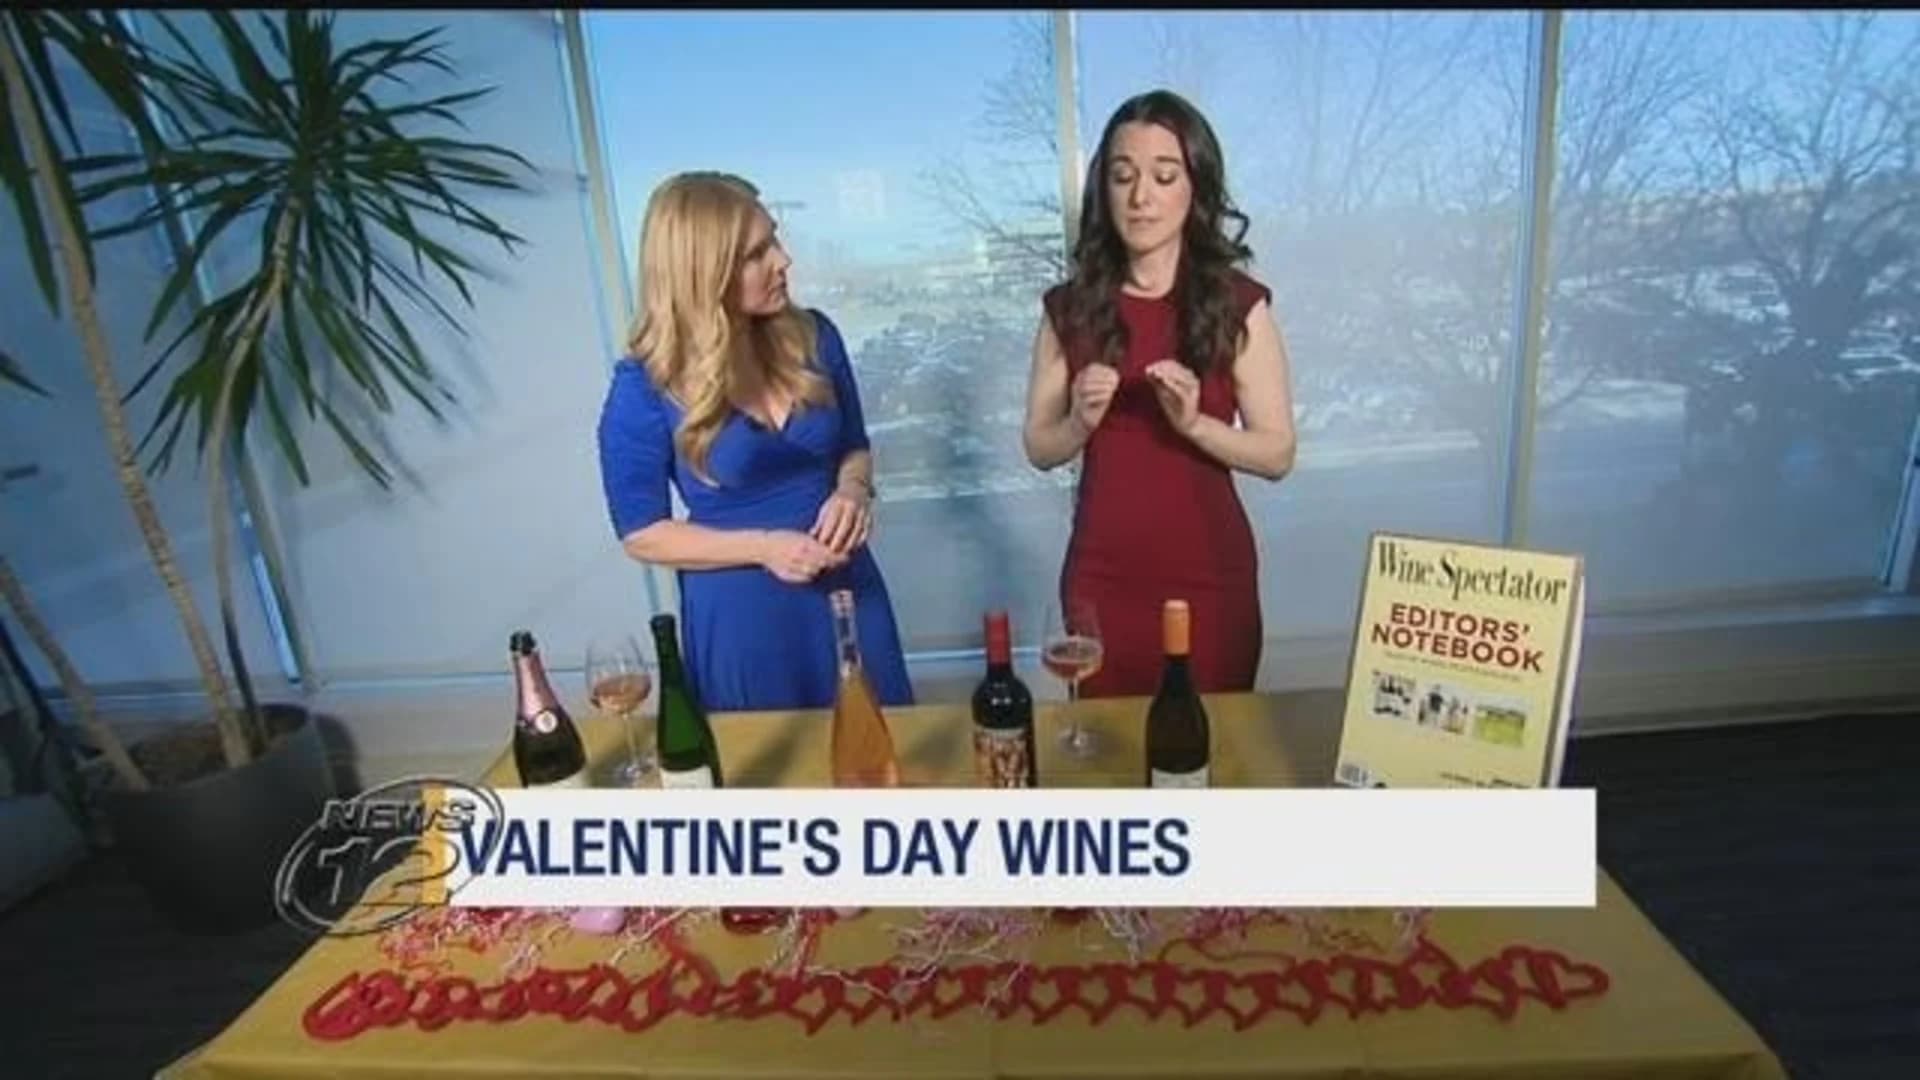 Celebrate with wine this Valentine's Day